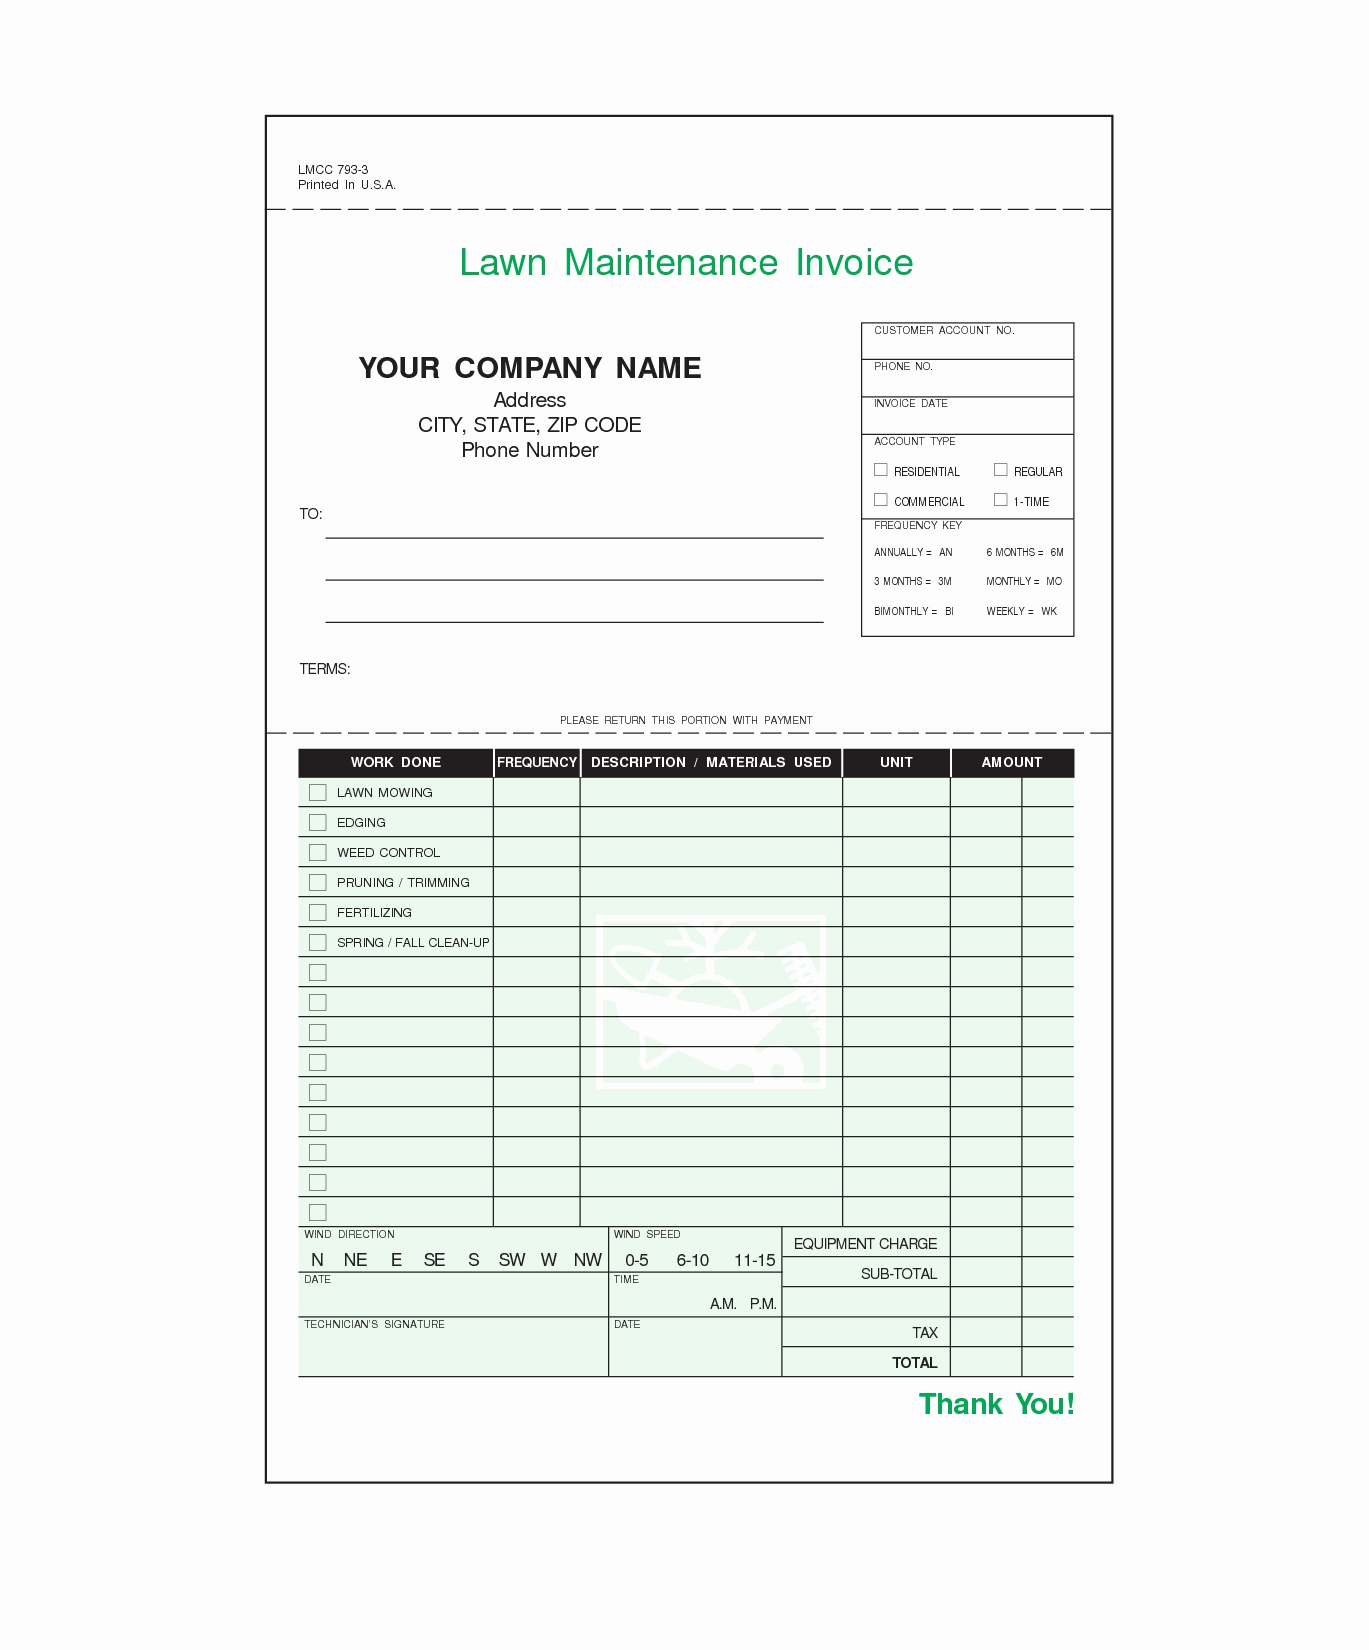 Lawn Service Invoice Template Excel Elegant Lawn Maintenance Invoice forms – Db Excel